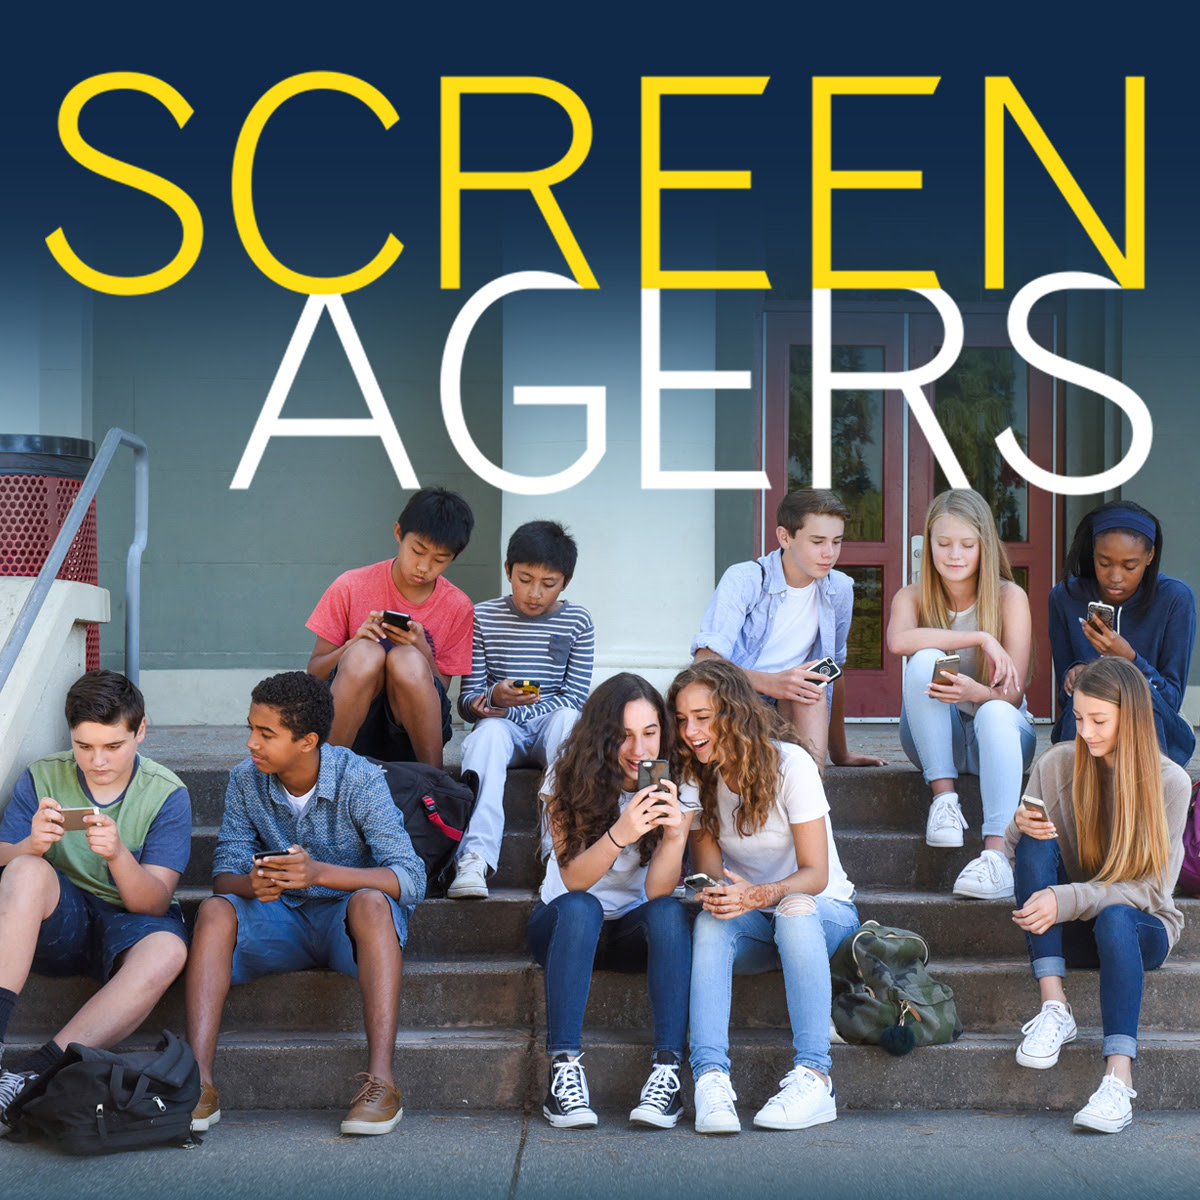 Screenagers Film Presented By Secaucus High School